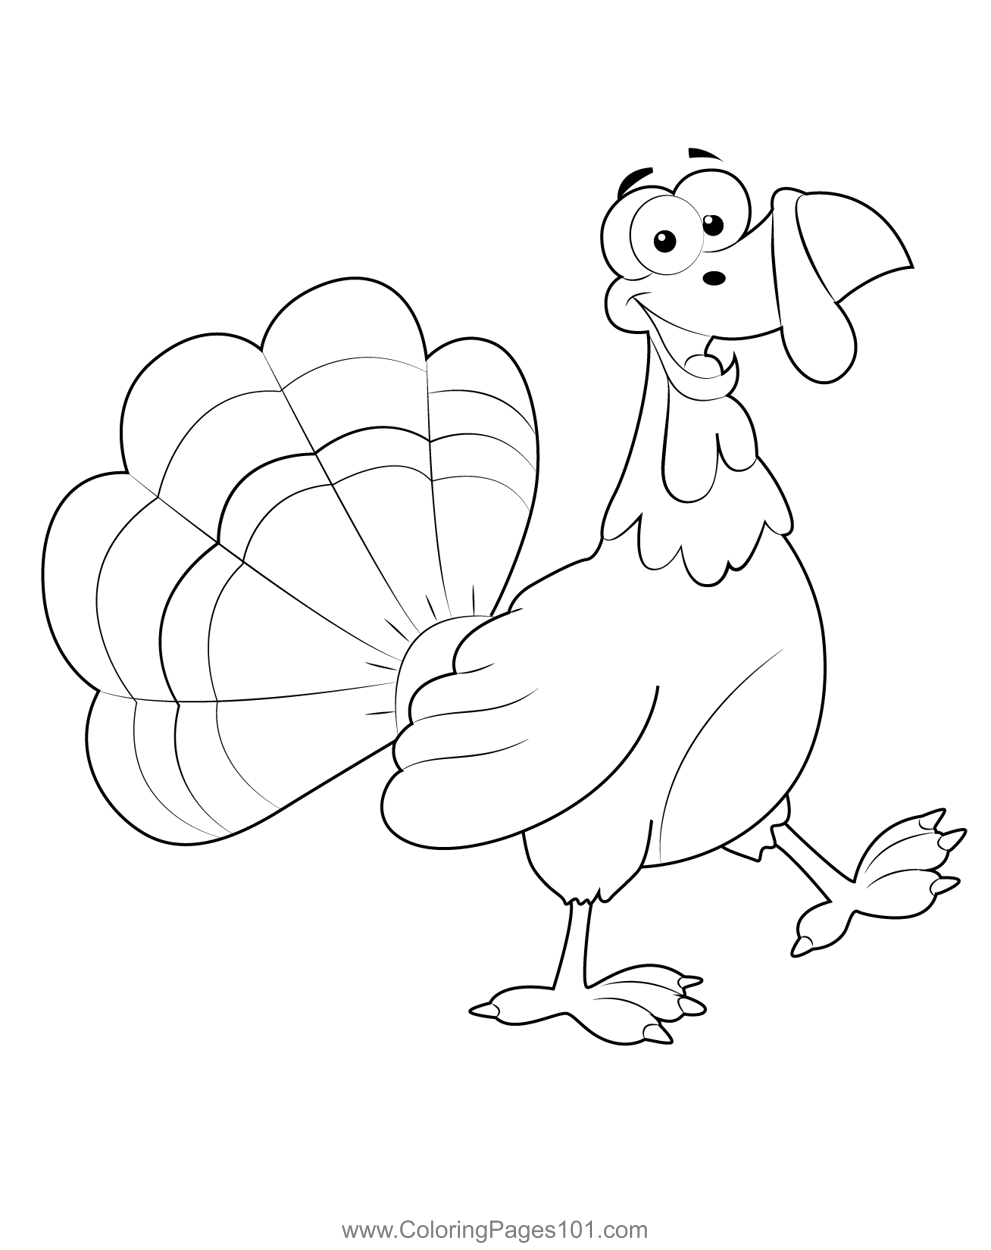 Happy Turkey Coloring Page for Kids - Free Turkeys Printable Coloring ...